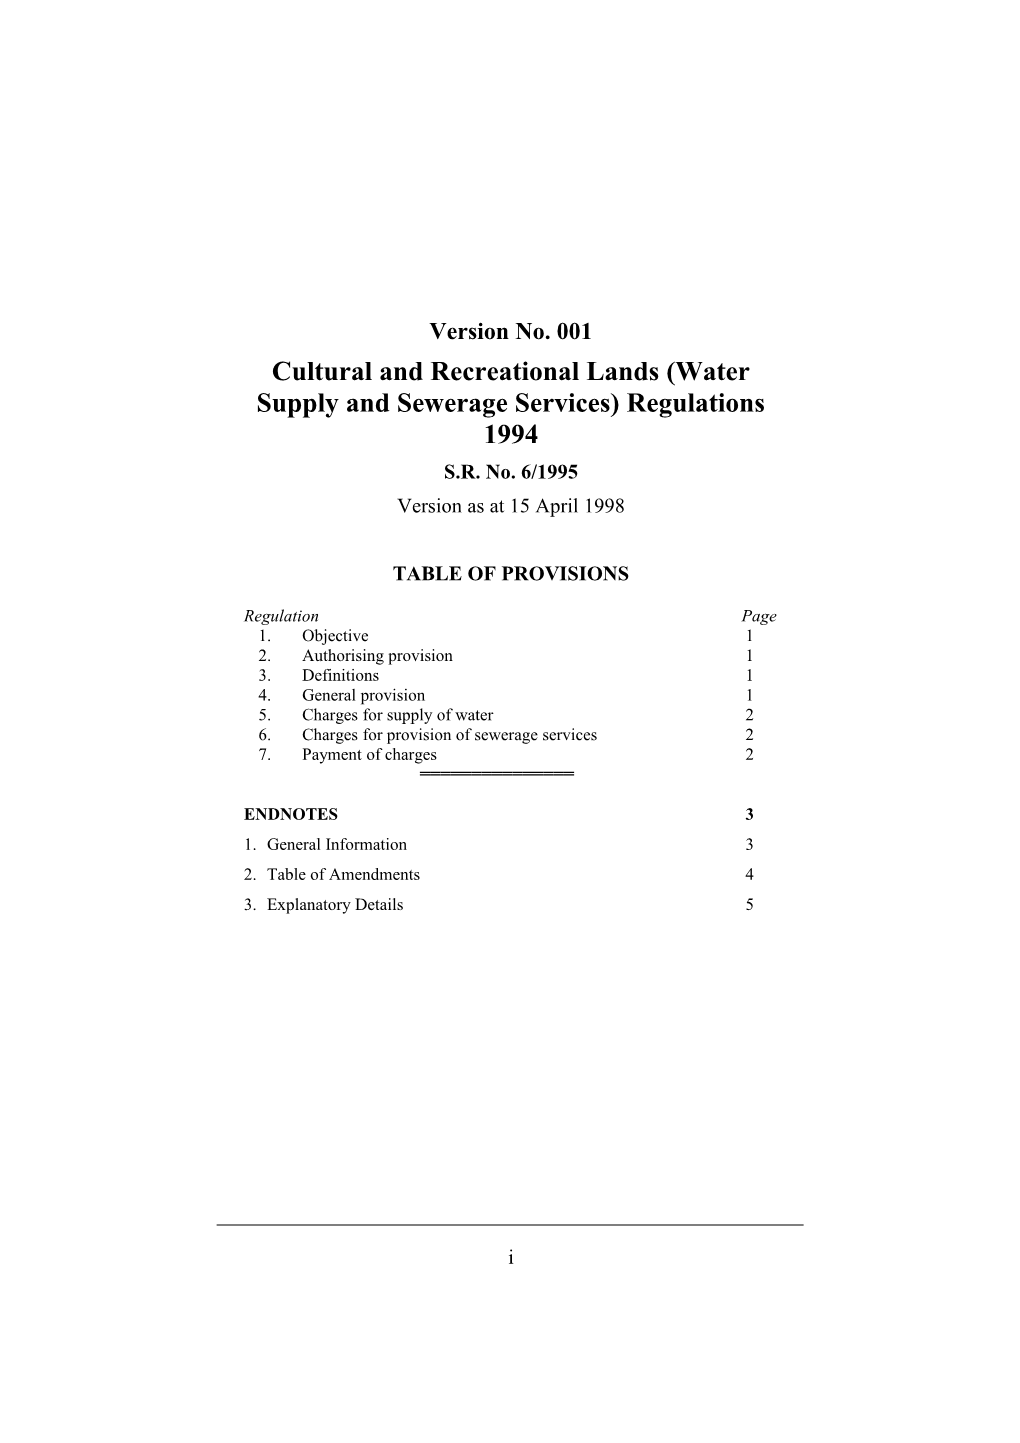 Cultural and Recreational Lands (Water Supply and Sewerage Services) Regulations 1994